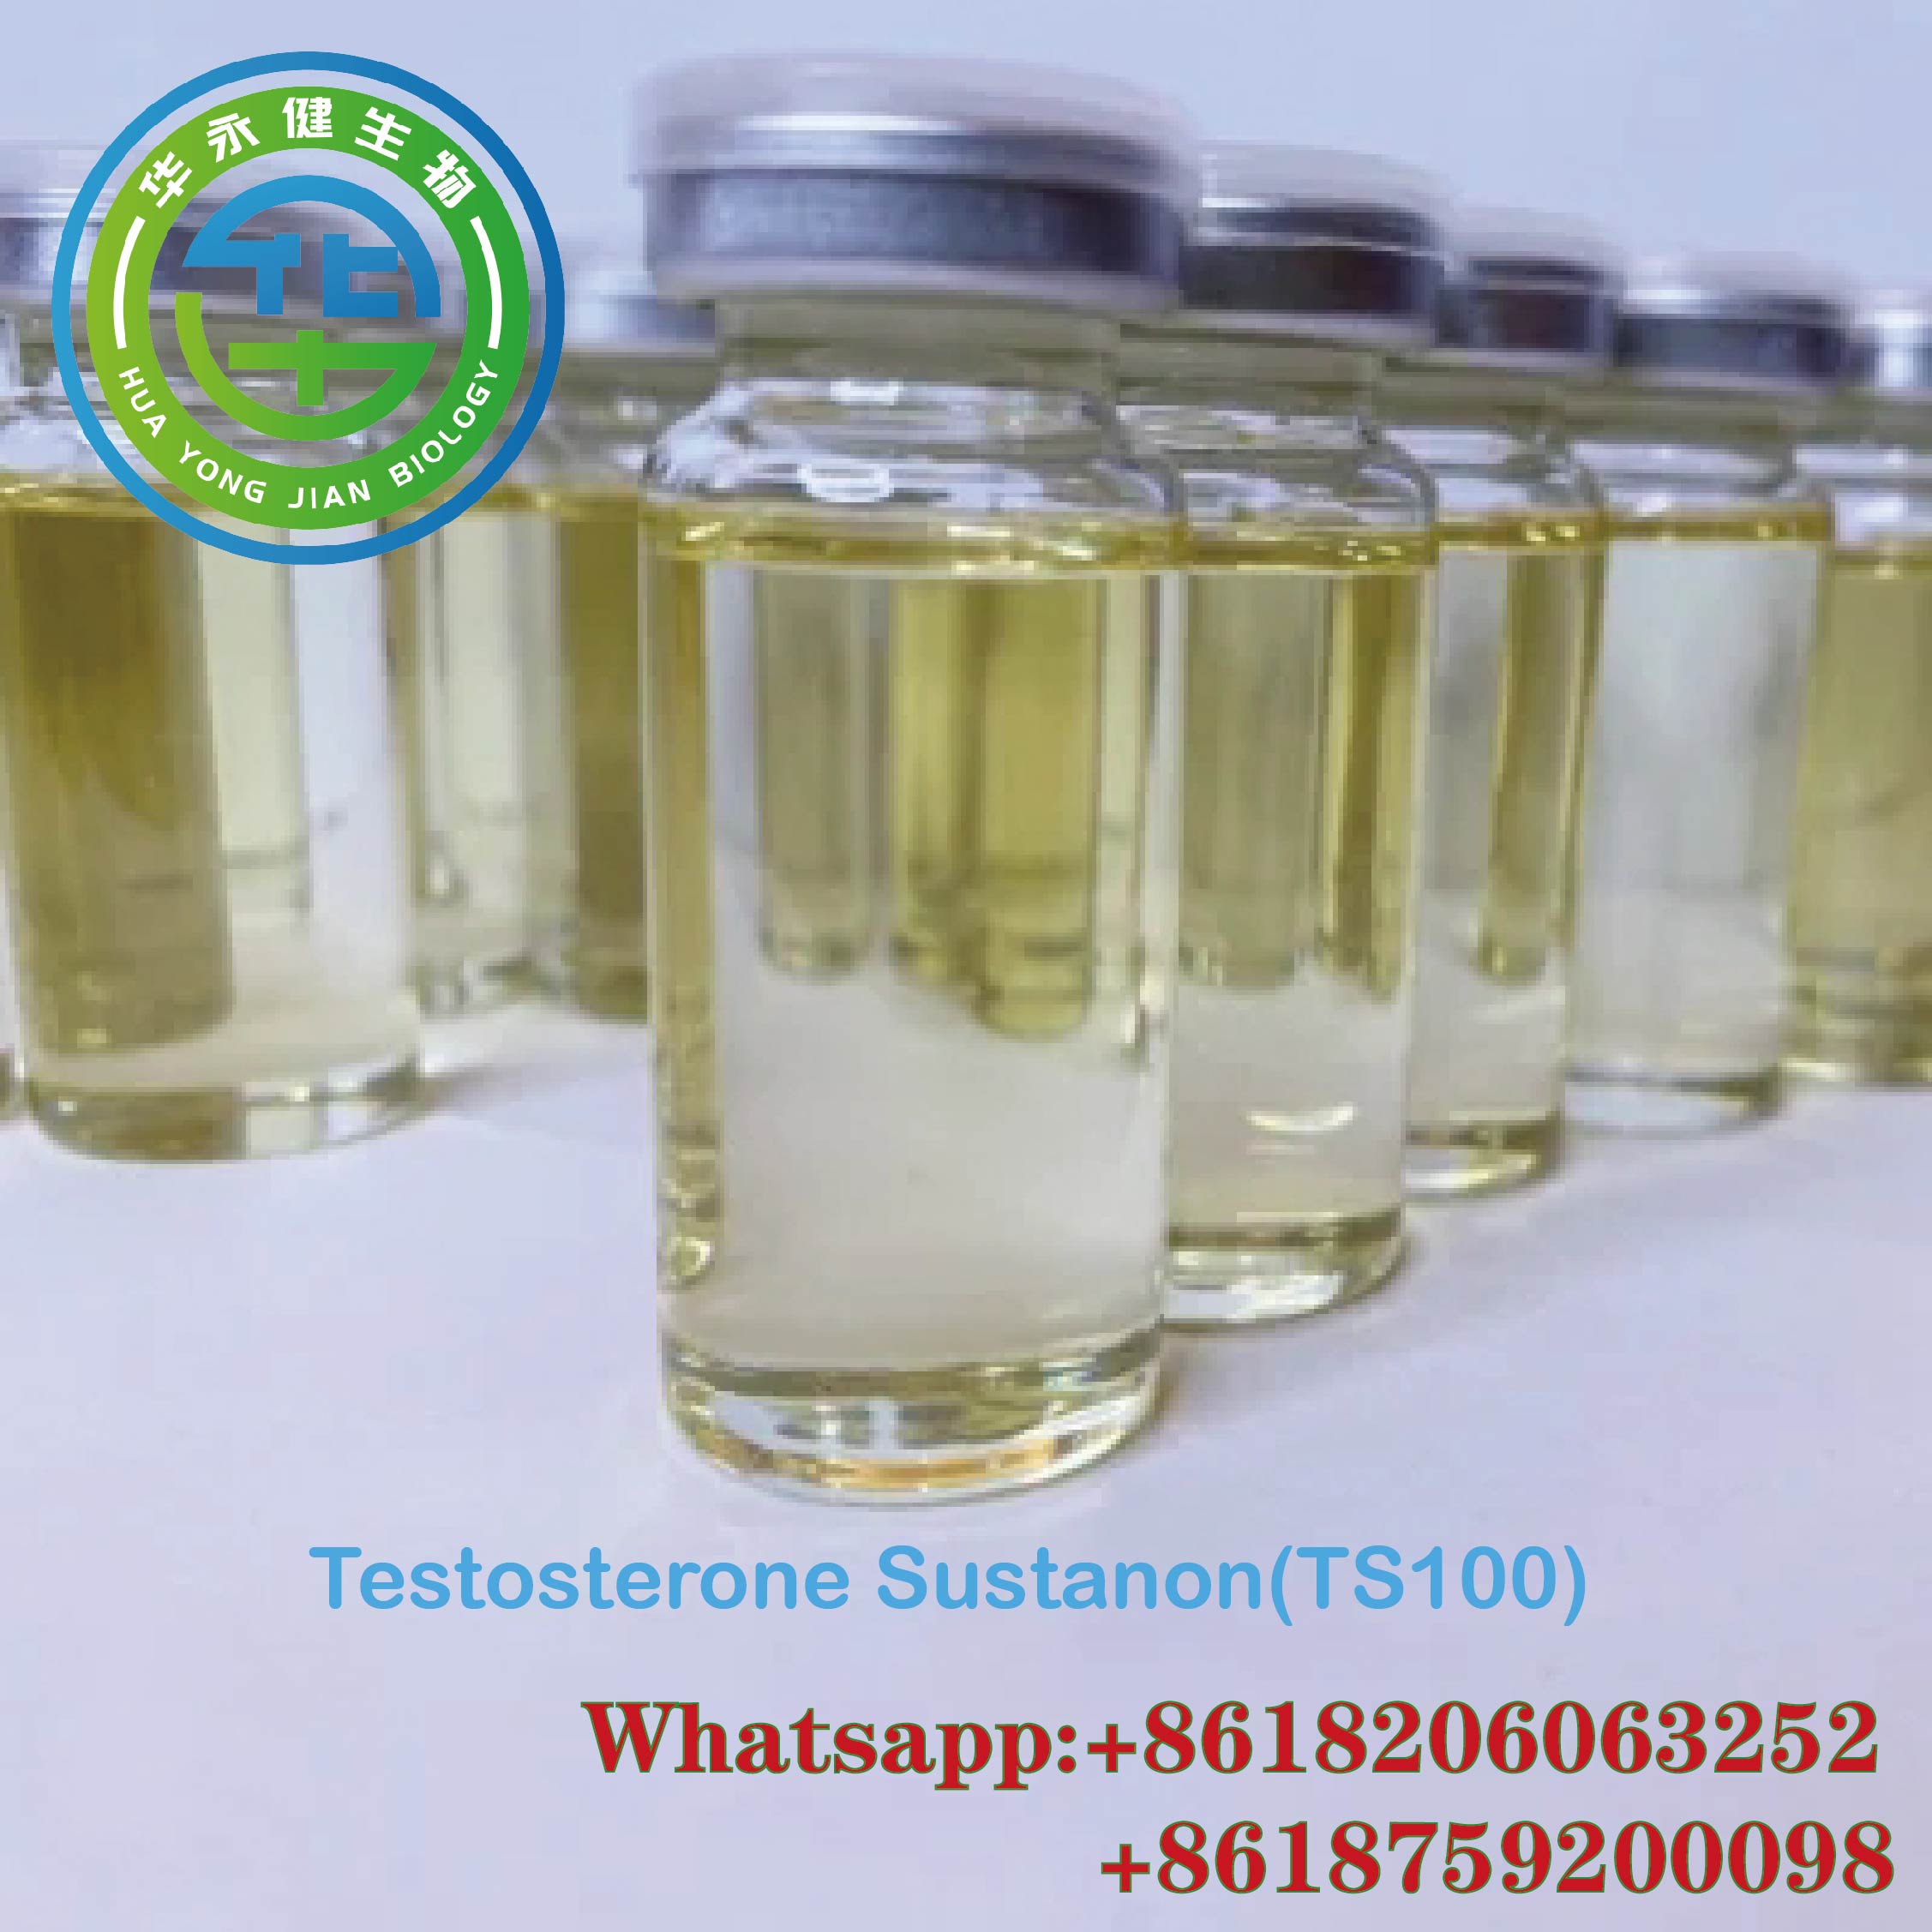 Pre - Finished Testosterone Sustanon Injecting Anabolic Steroids Hormone Oils TS100 For Muscle Gains